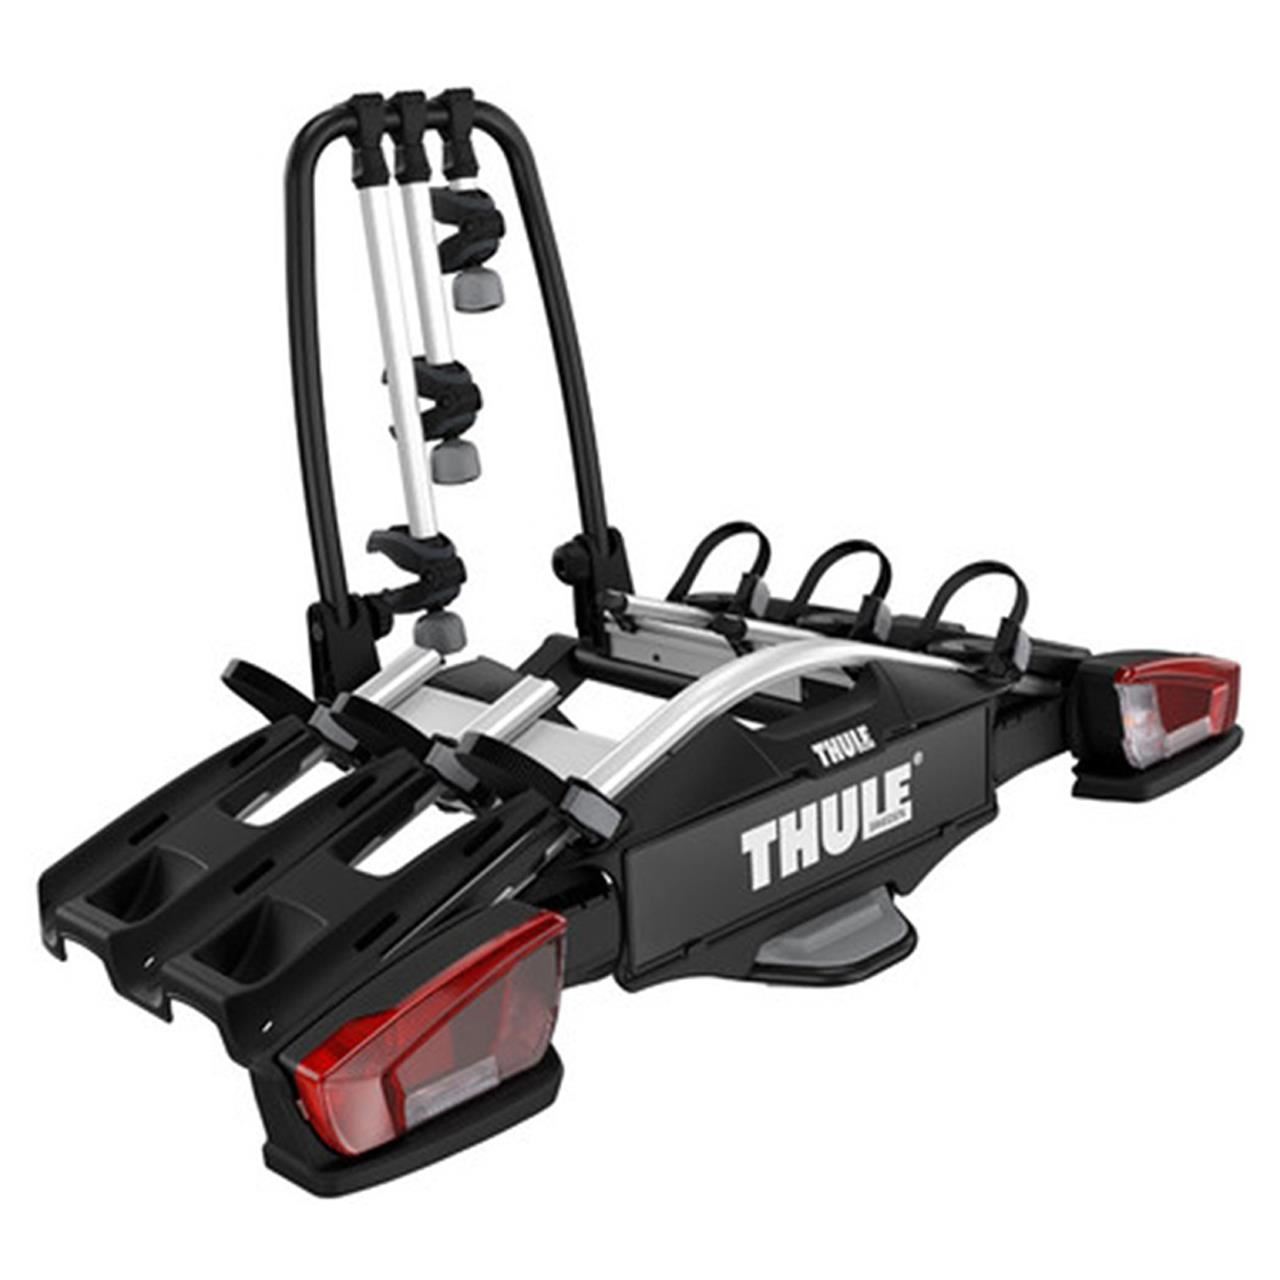 Suport 3 biciclete Thule EuroWay VeloCompact 926